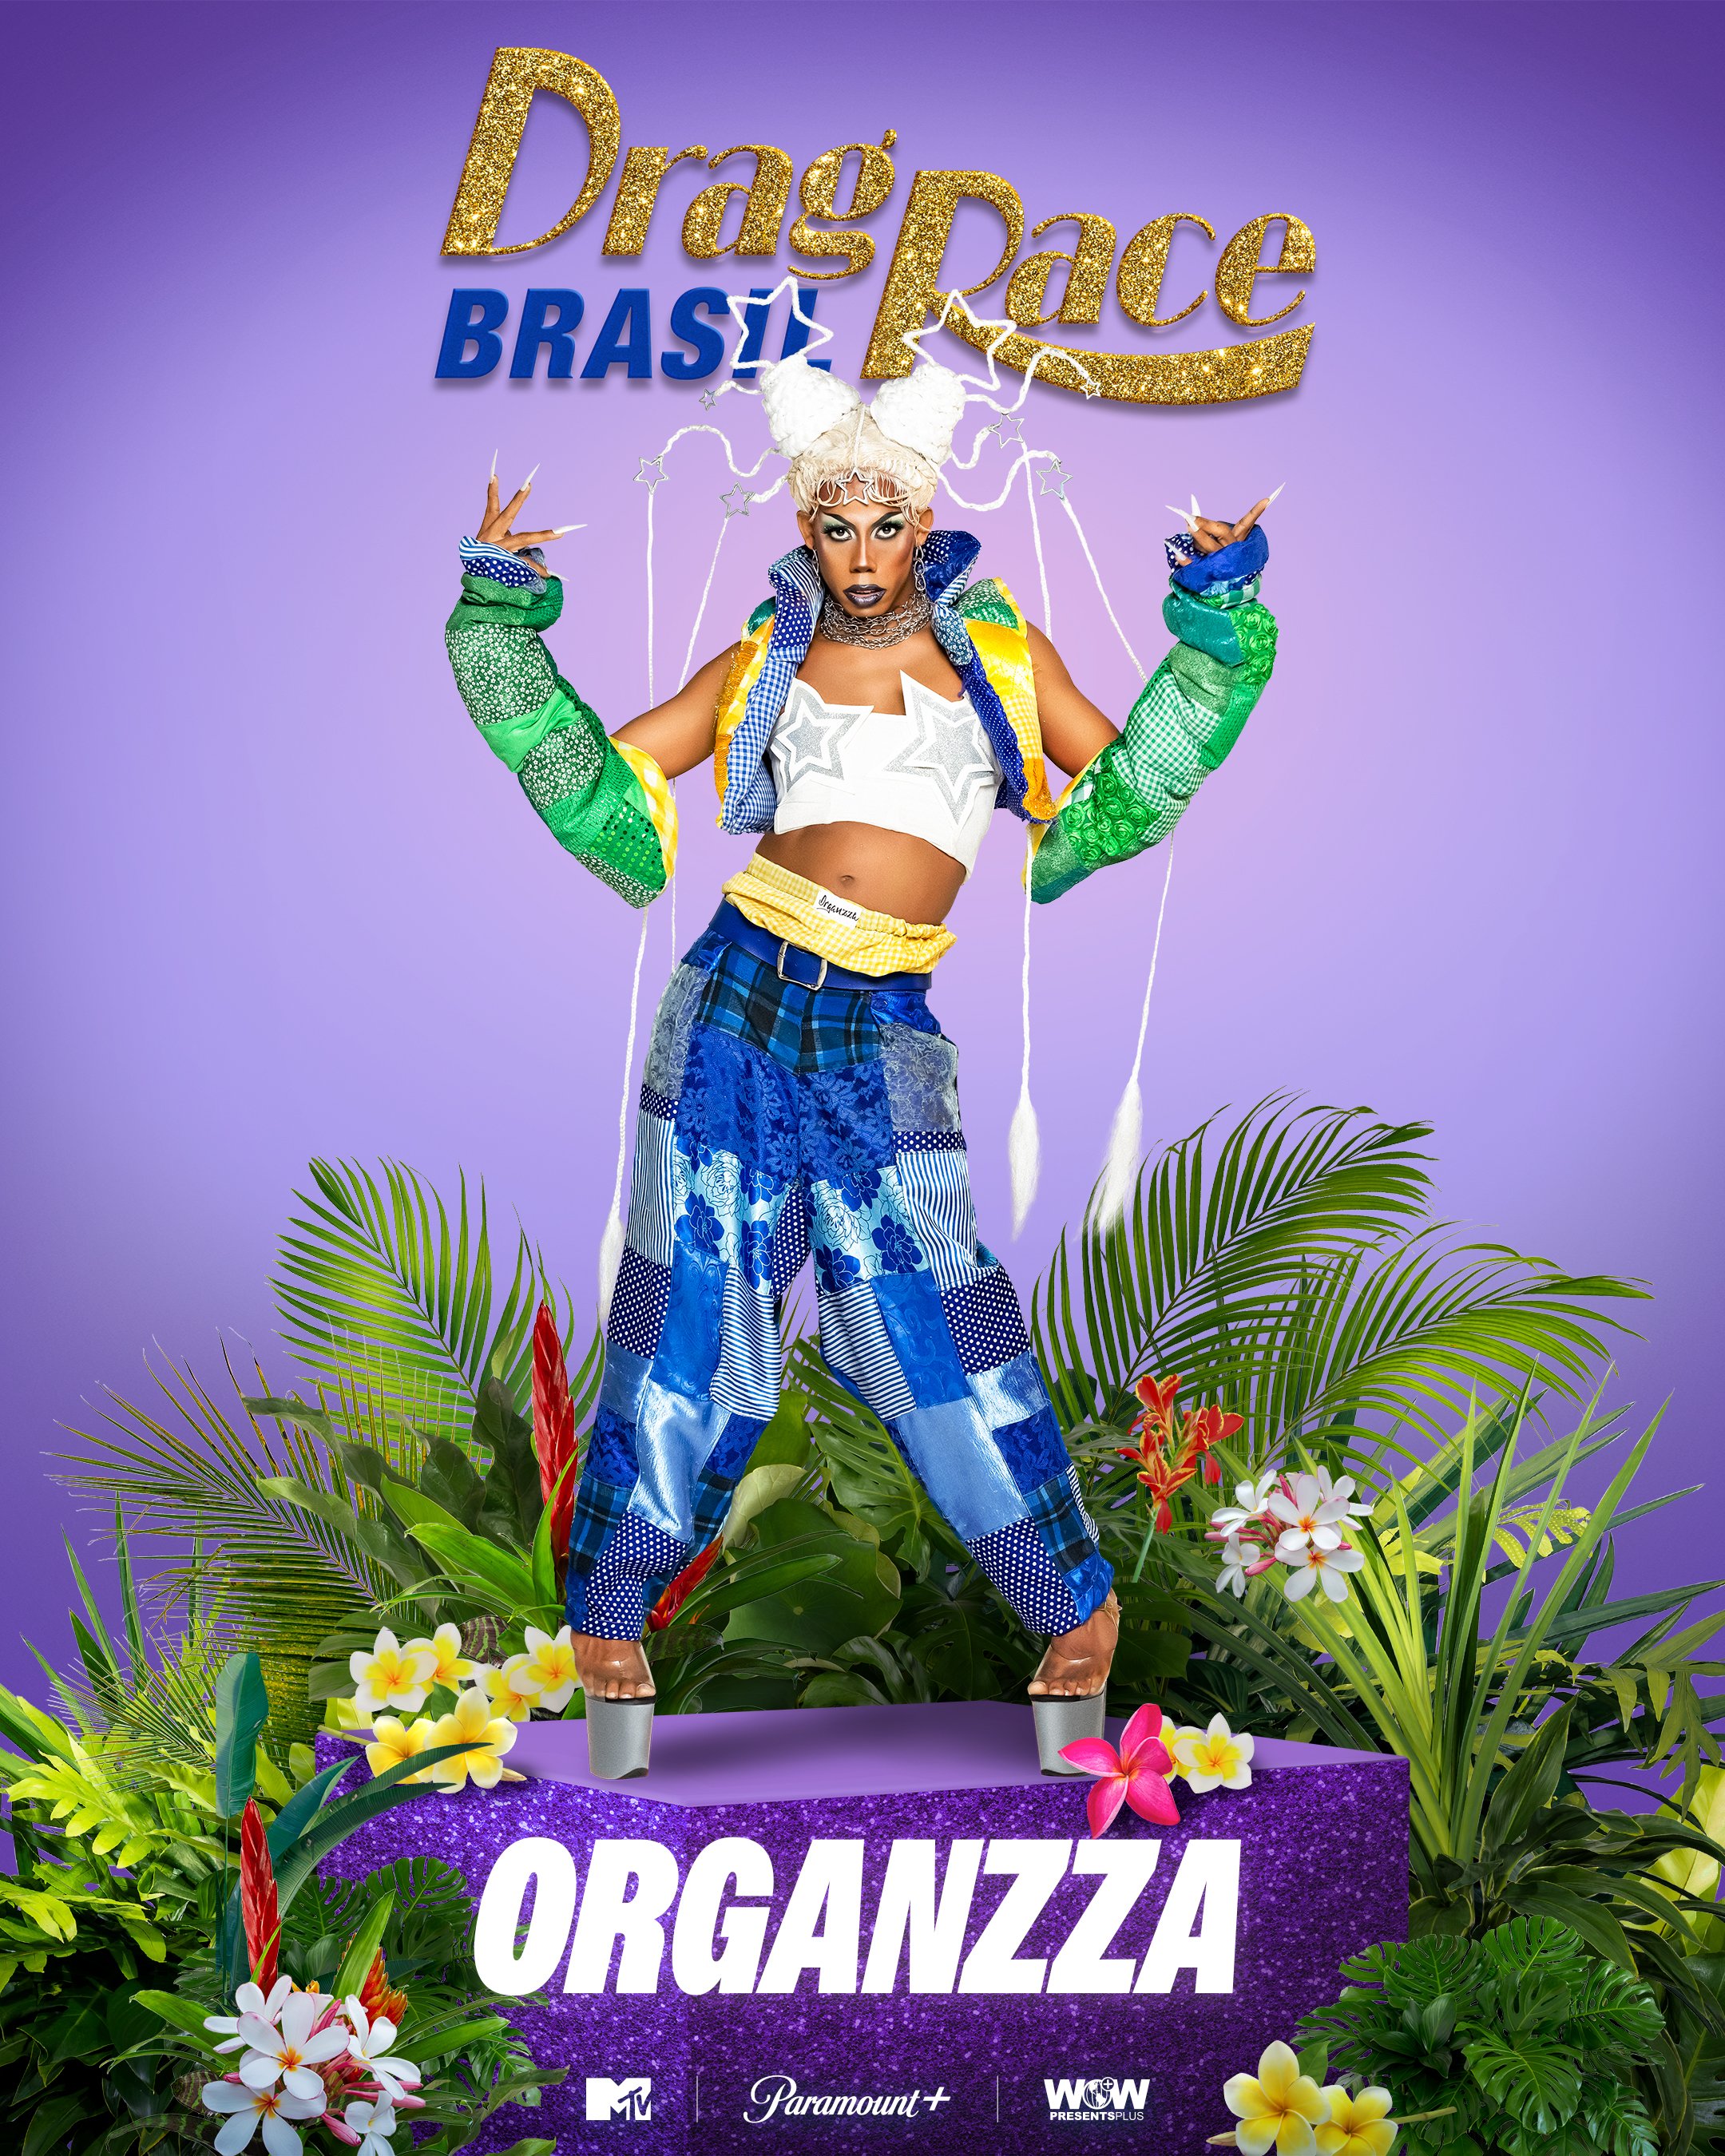 Meet the Queens Competing in the First Season of 'Drag Race Brasil